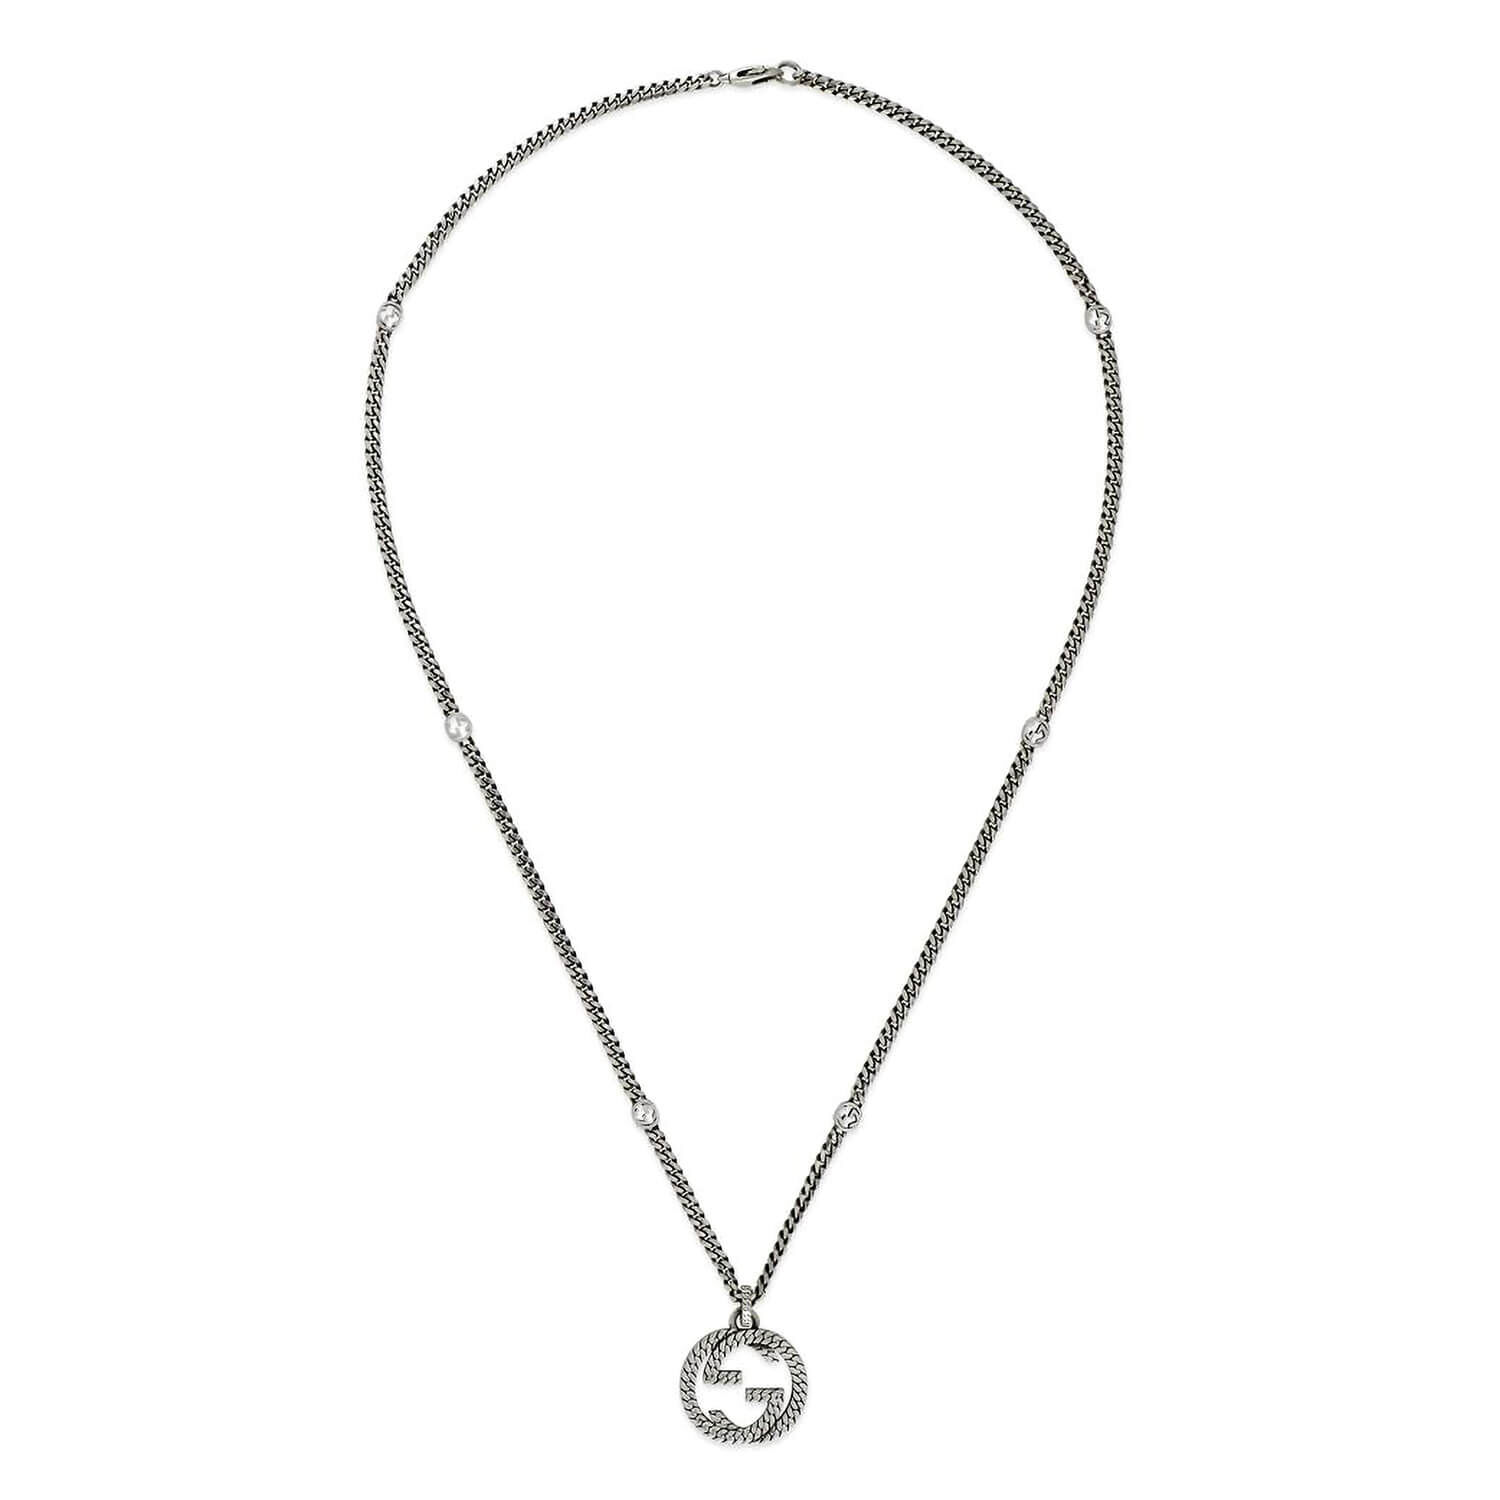 Gucci Women's GG Marmont Key Necklace in Silver Gucci